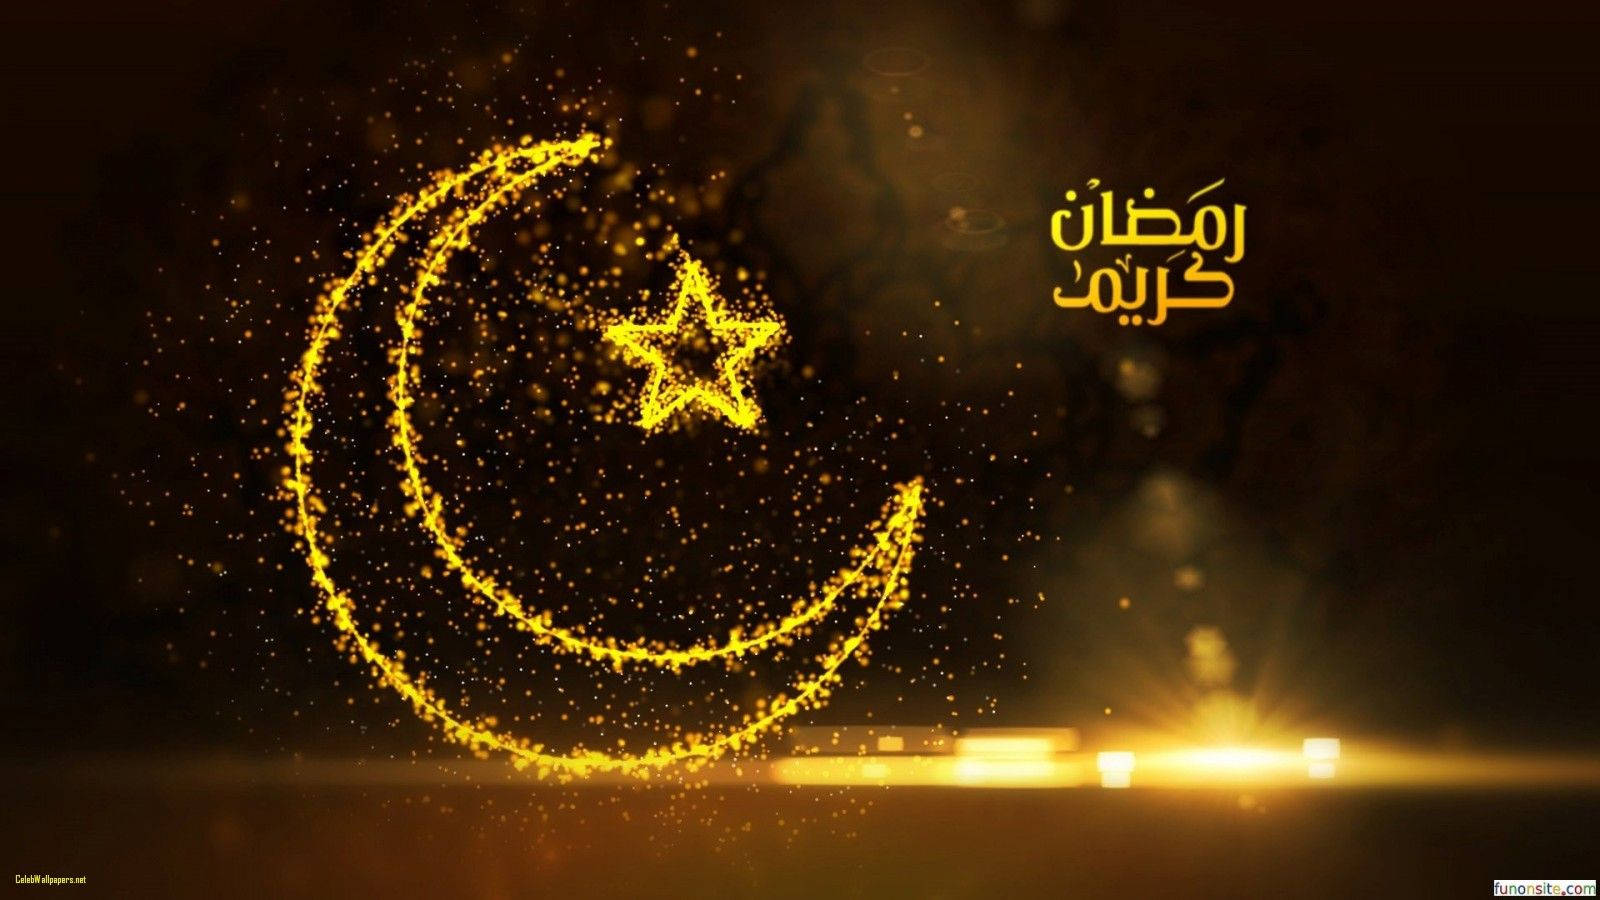 A nighttime view of a crescent moon and star in the Islamic faith Wallpaper